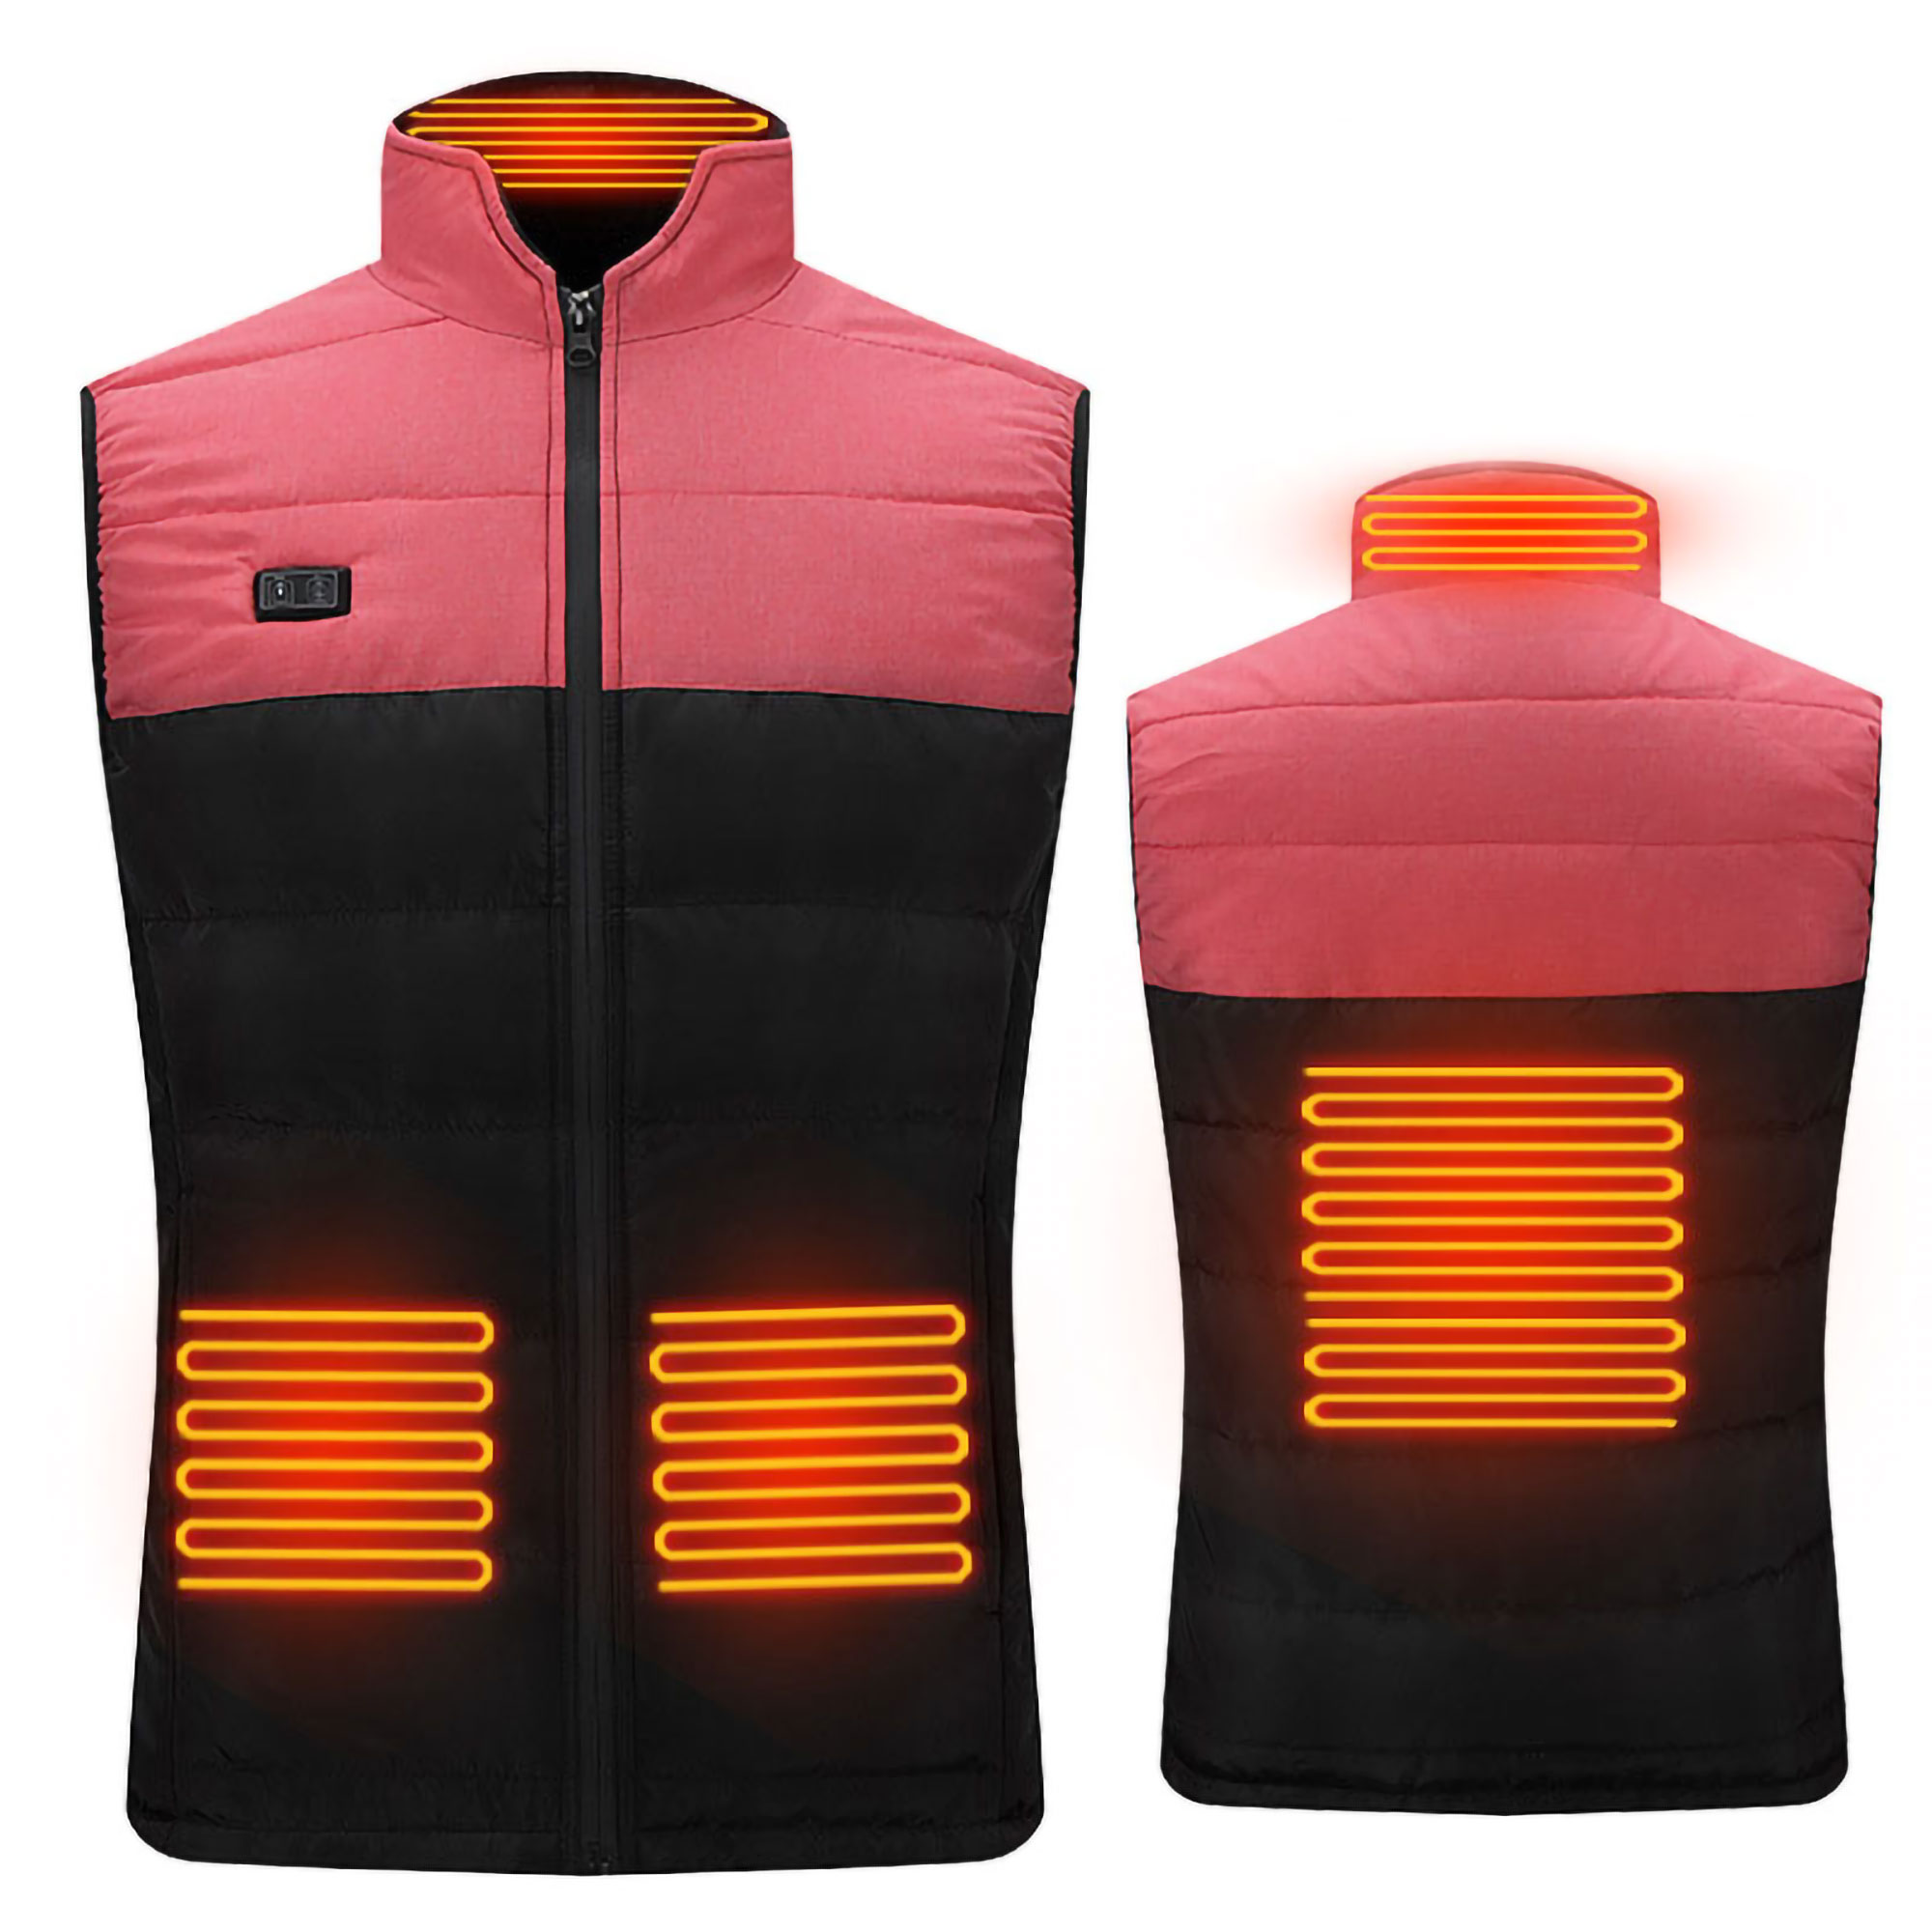 Sexy Dance Outdoor Thermal Heated Vest for Men Women Electric Coat Sleeveless Zipper Heating Jacket Winter Warmth Outwear With Battery Pack - image 1 of 3